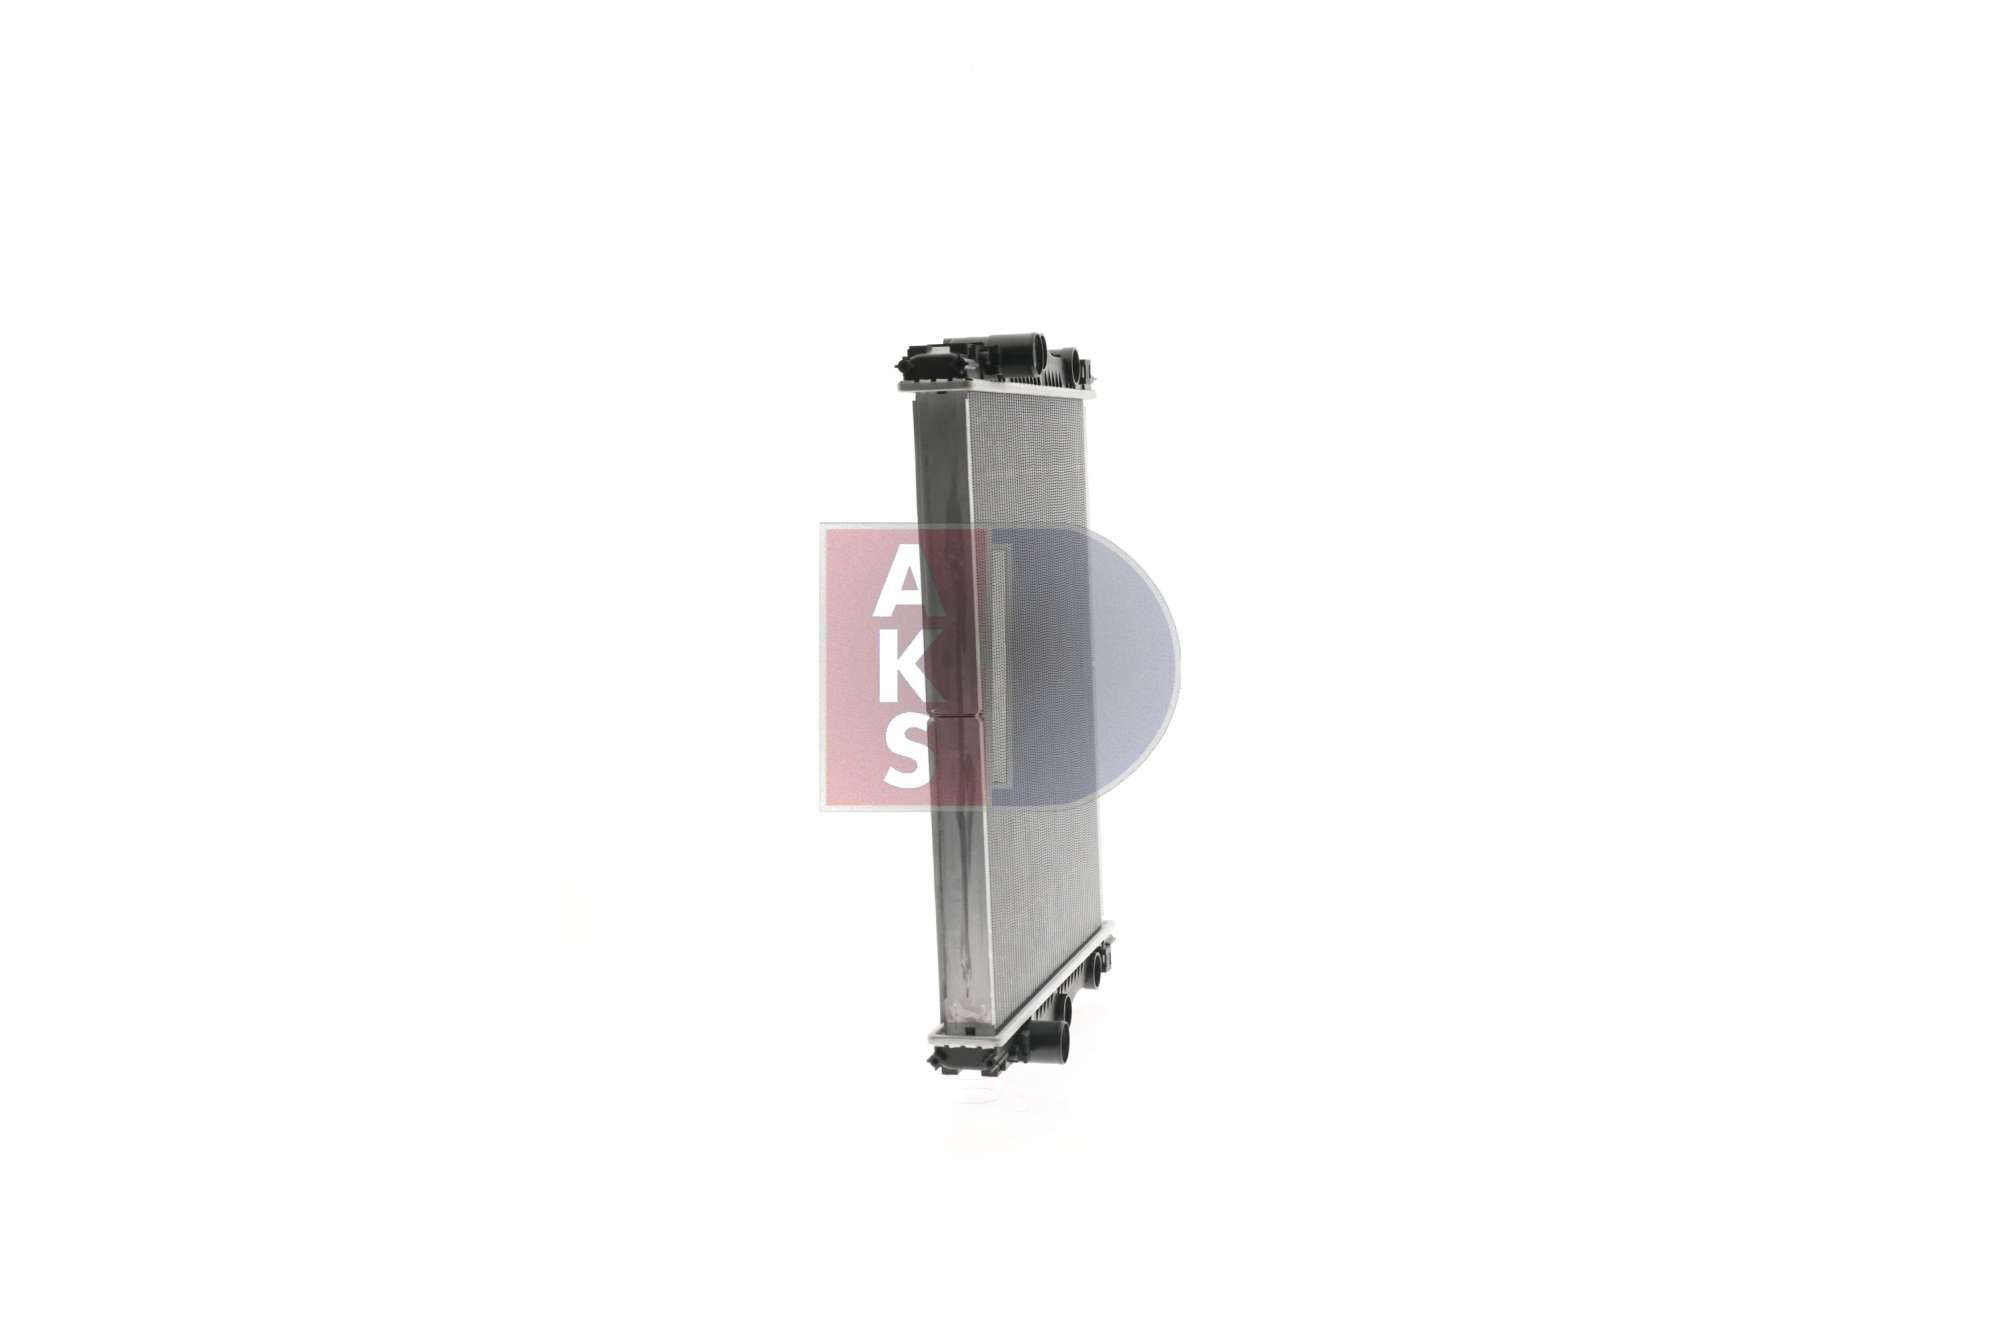 290013S Radiator 290013S AKS DASIS Aluminium, 660 x 530 x 48 mm, without frame, Brazed cooling fins